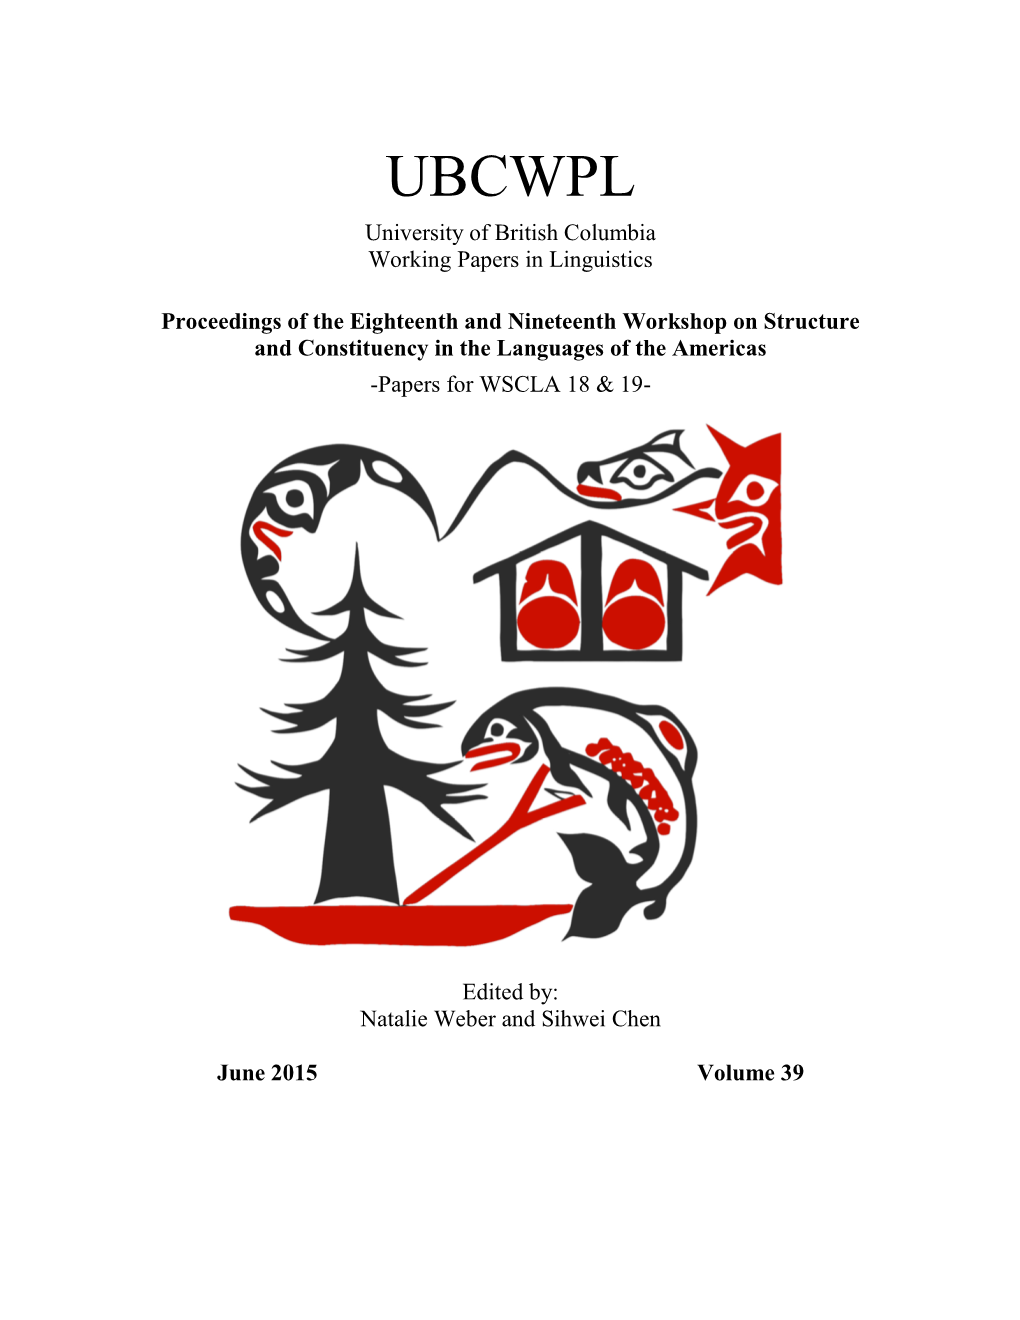 UBCWPL University of British Columbia Working Papers in Linguistics